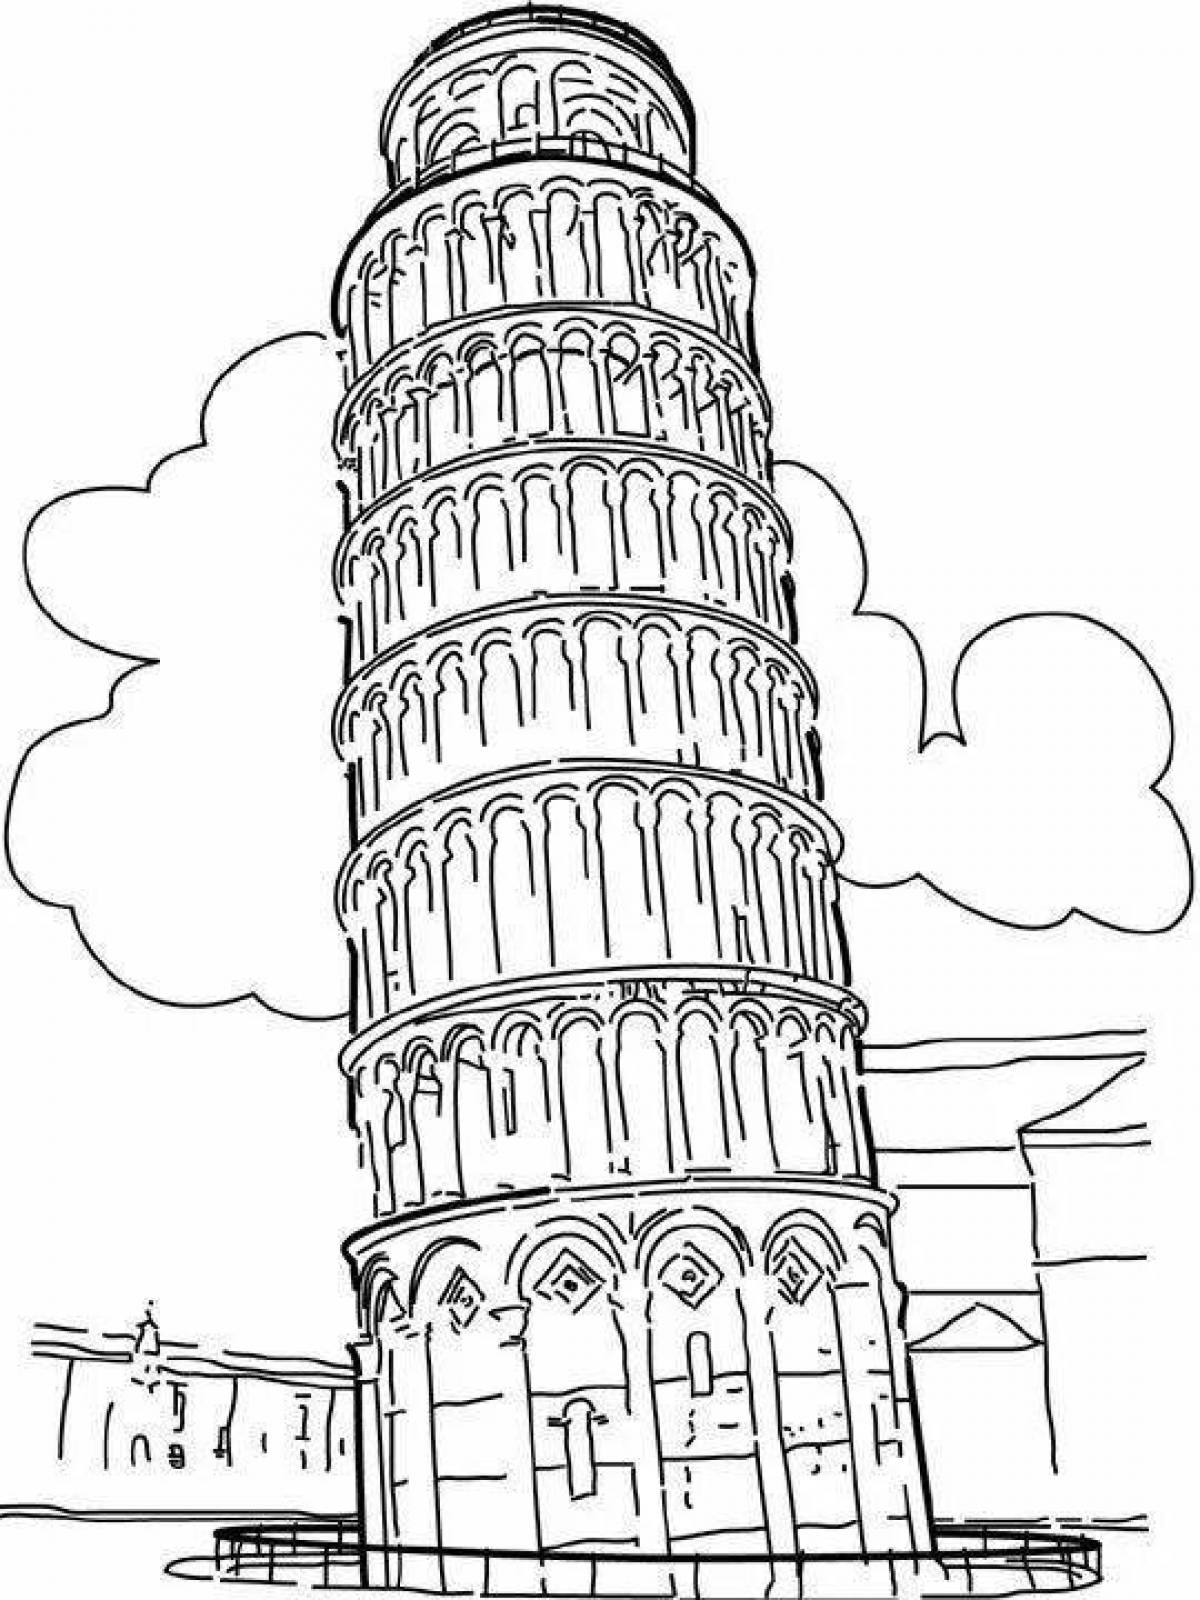 Wonderful coloring of the Leaning Tower of Pisa